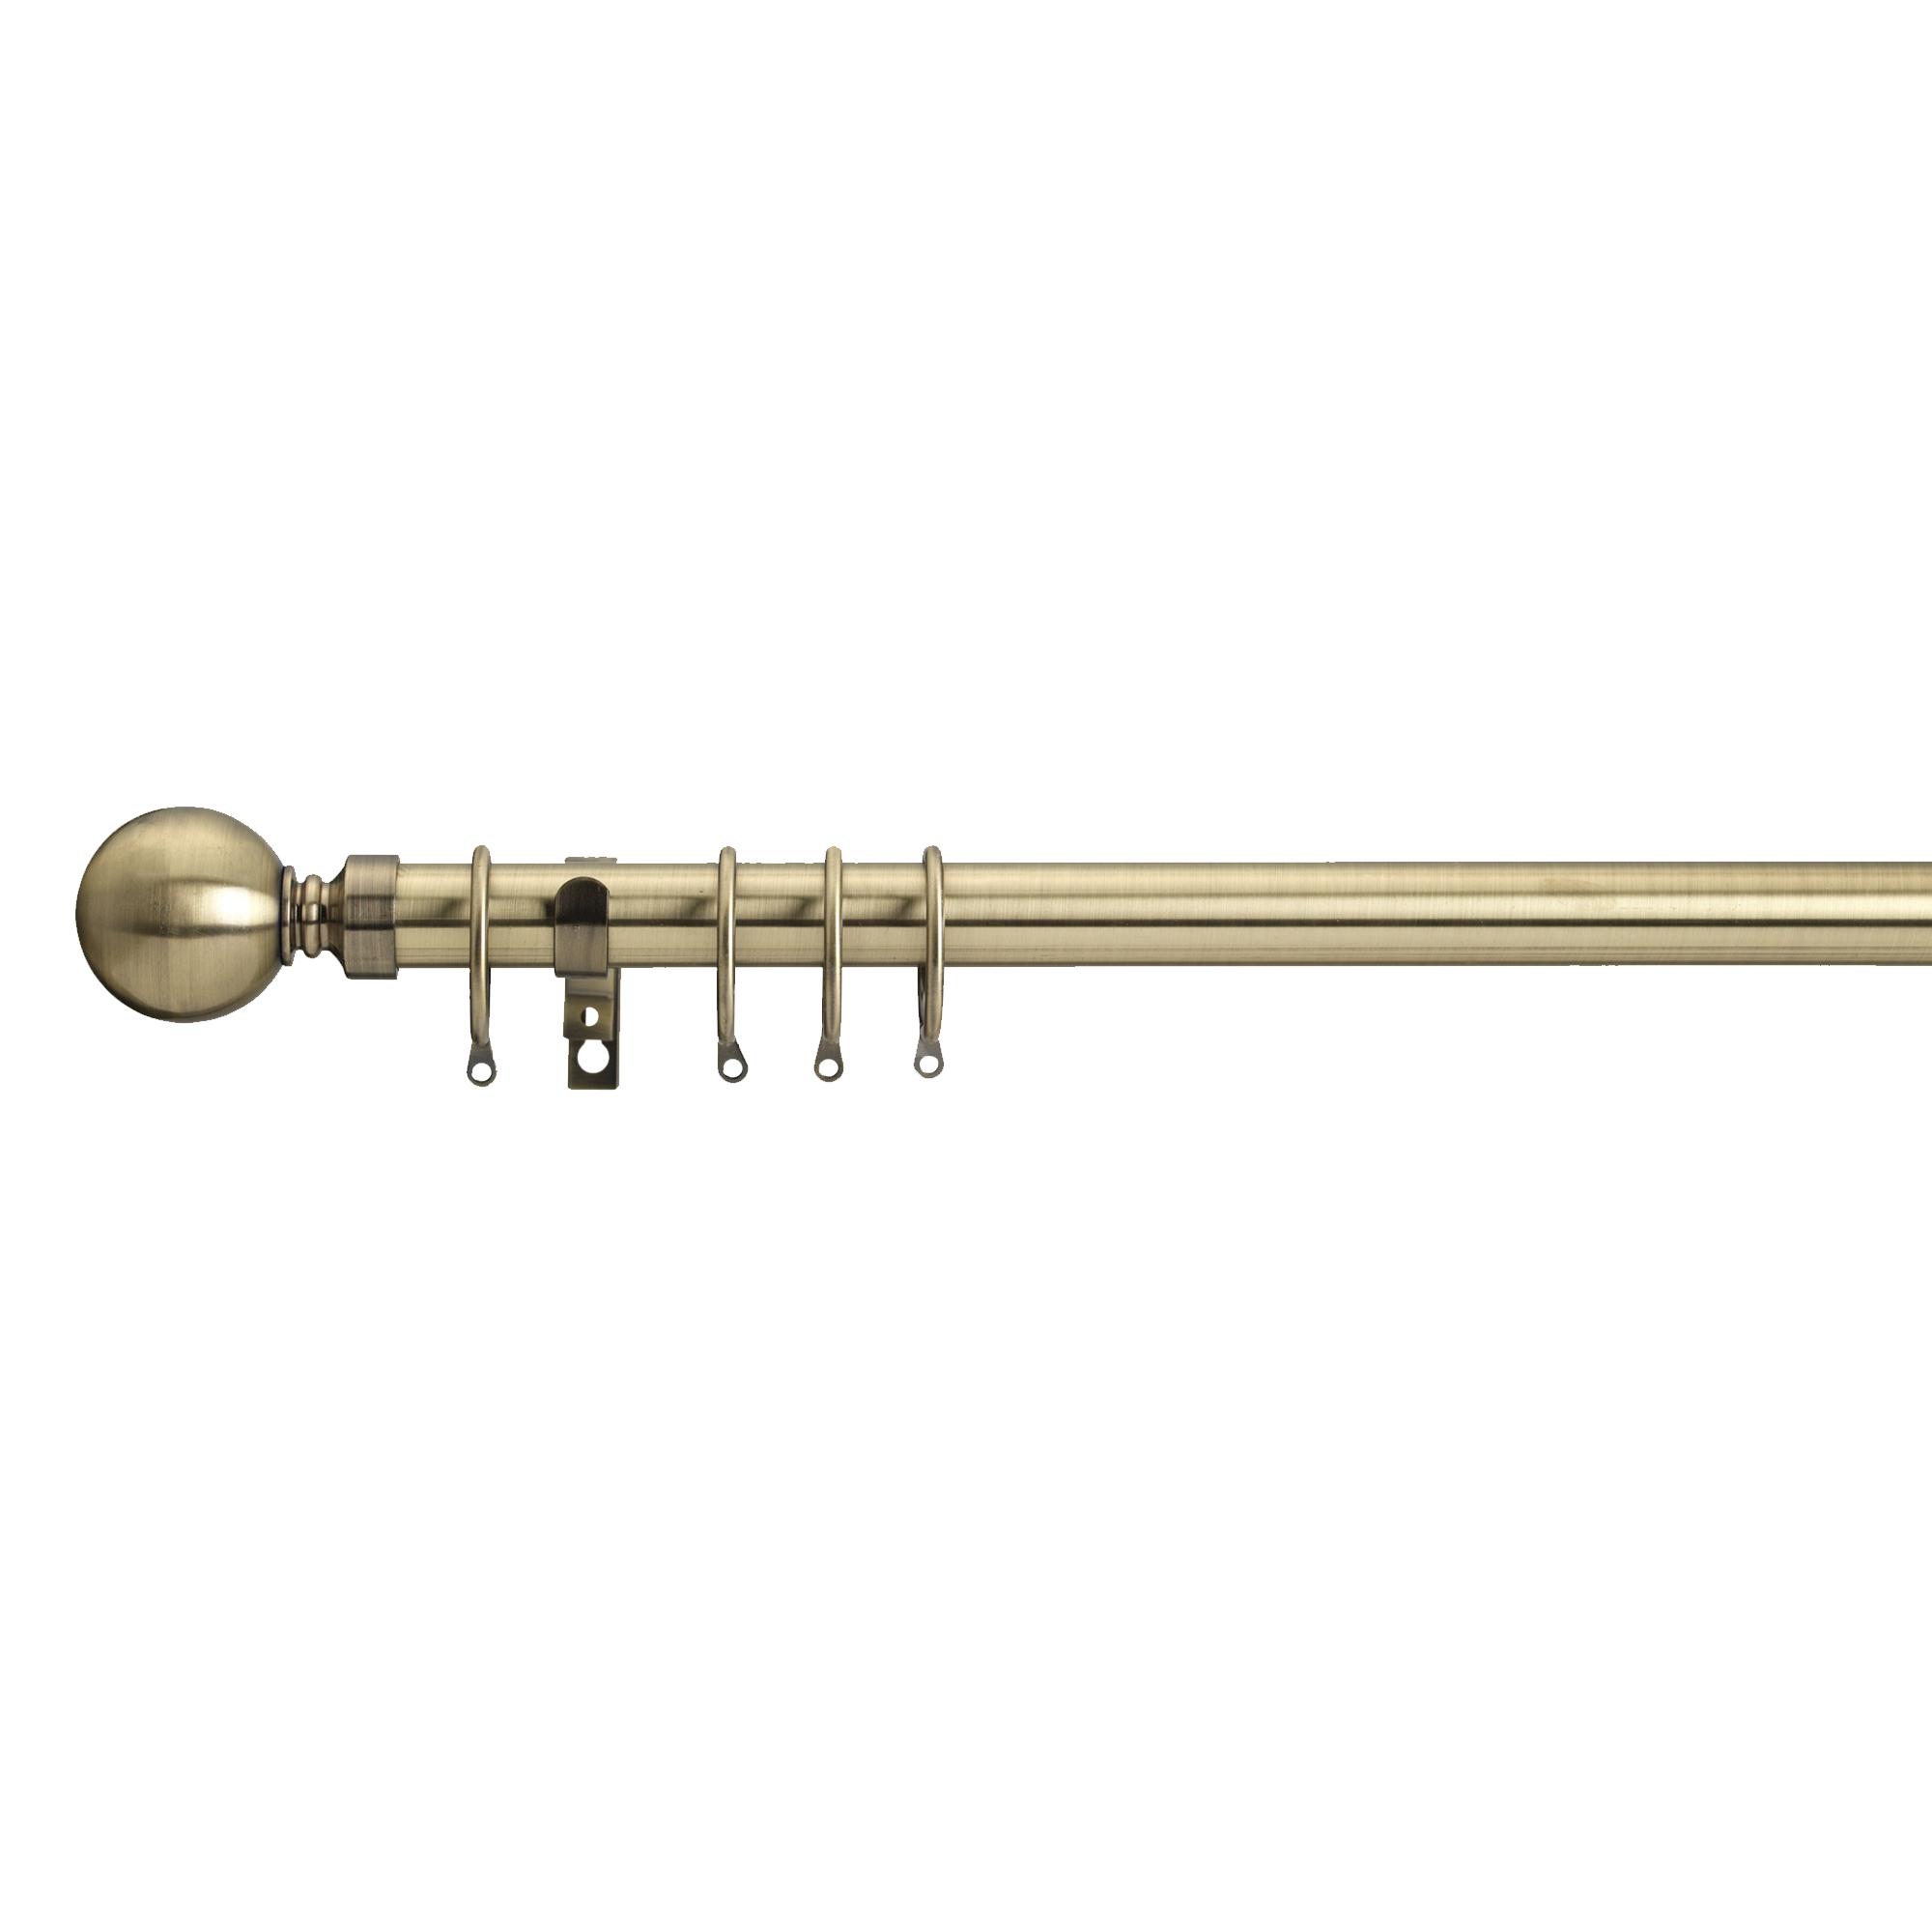 Ashton Fixed Metal Curtain Pole with Rings